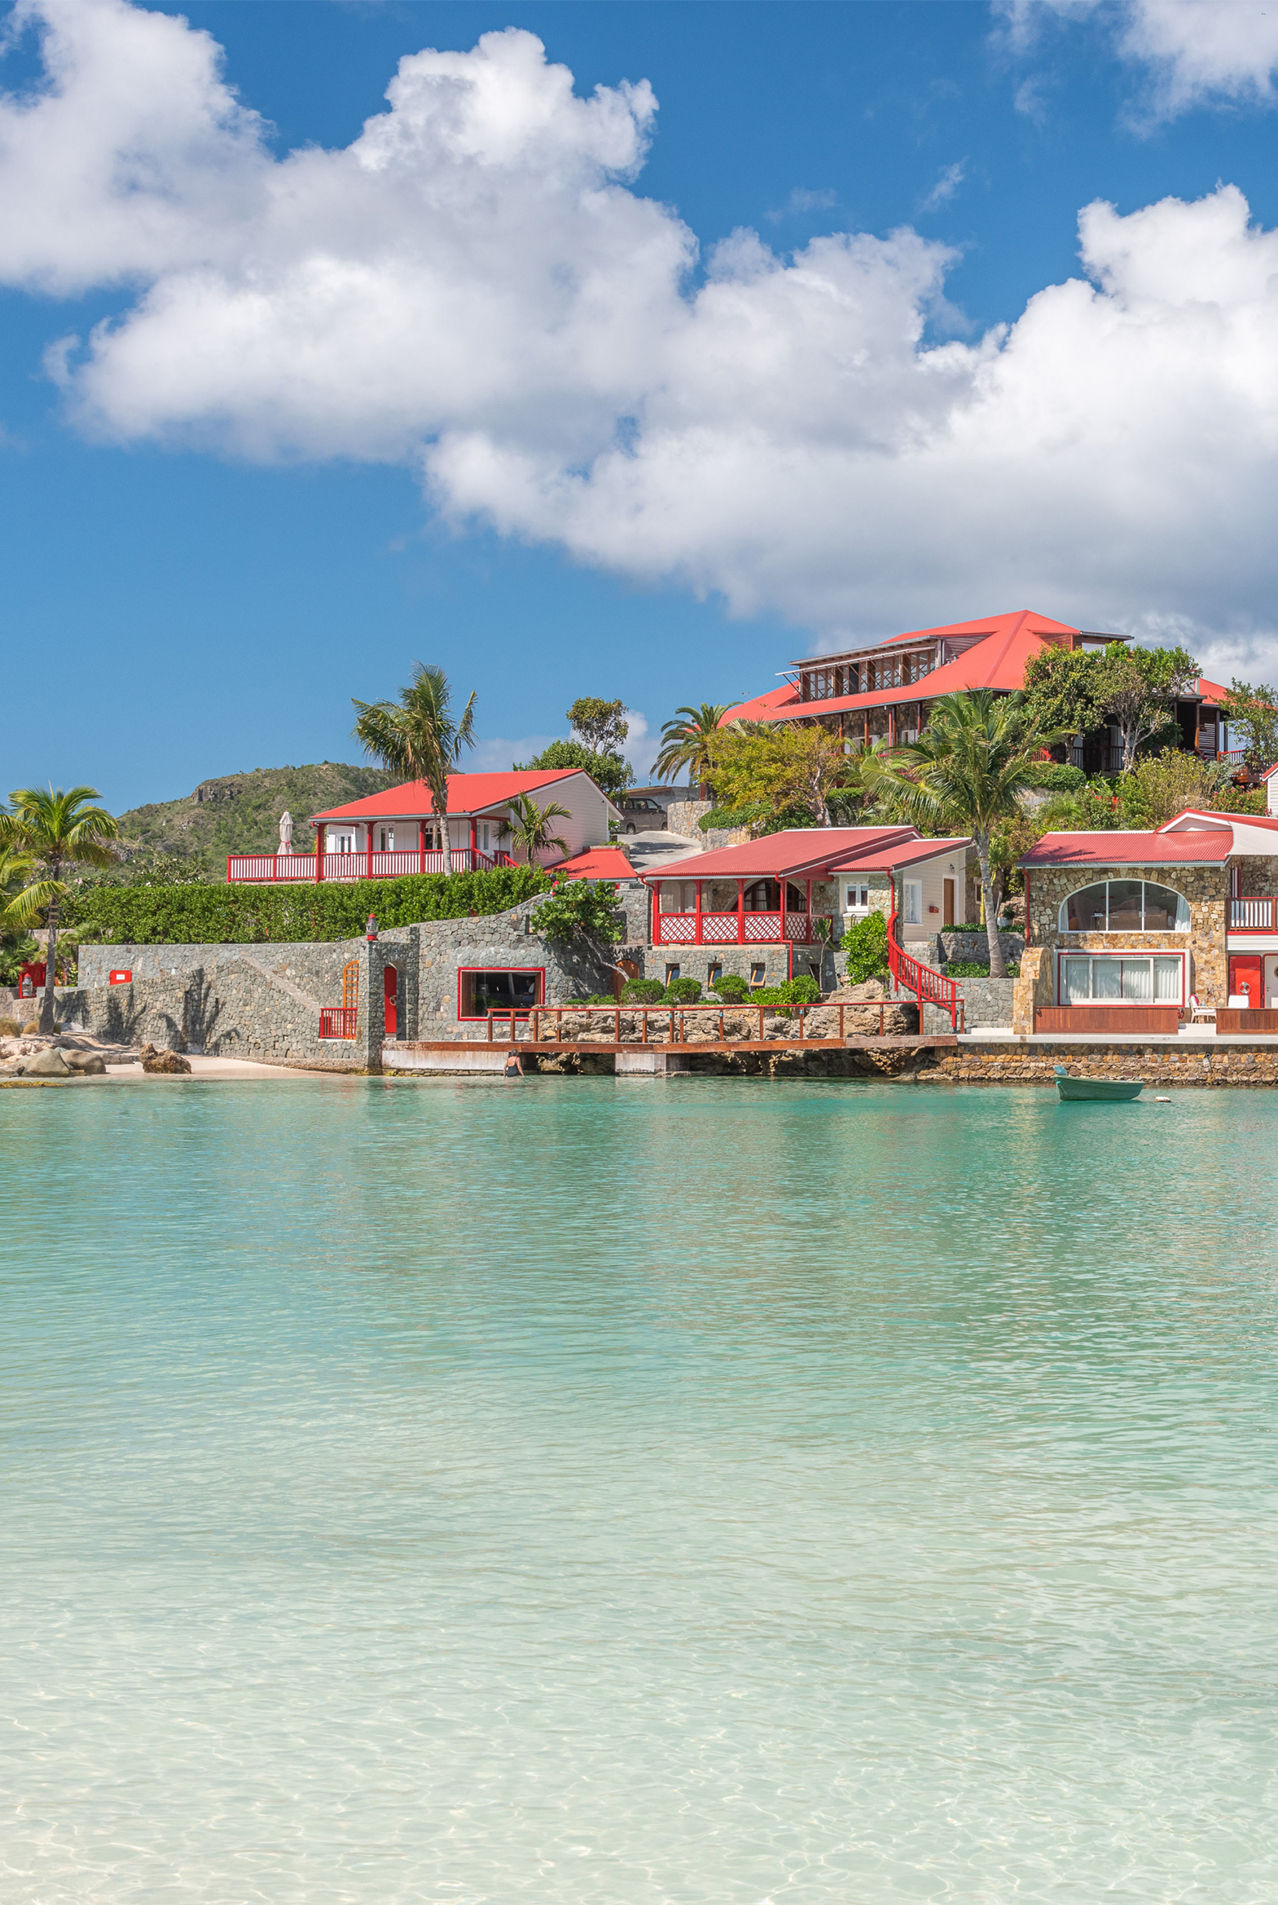 Discover St. Barths differently